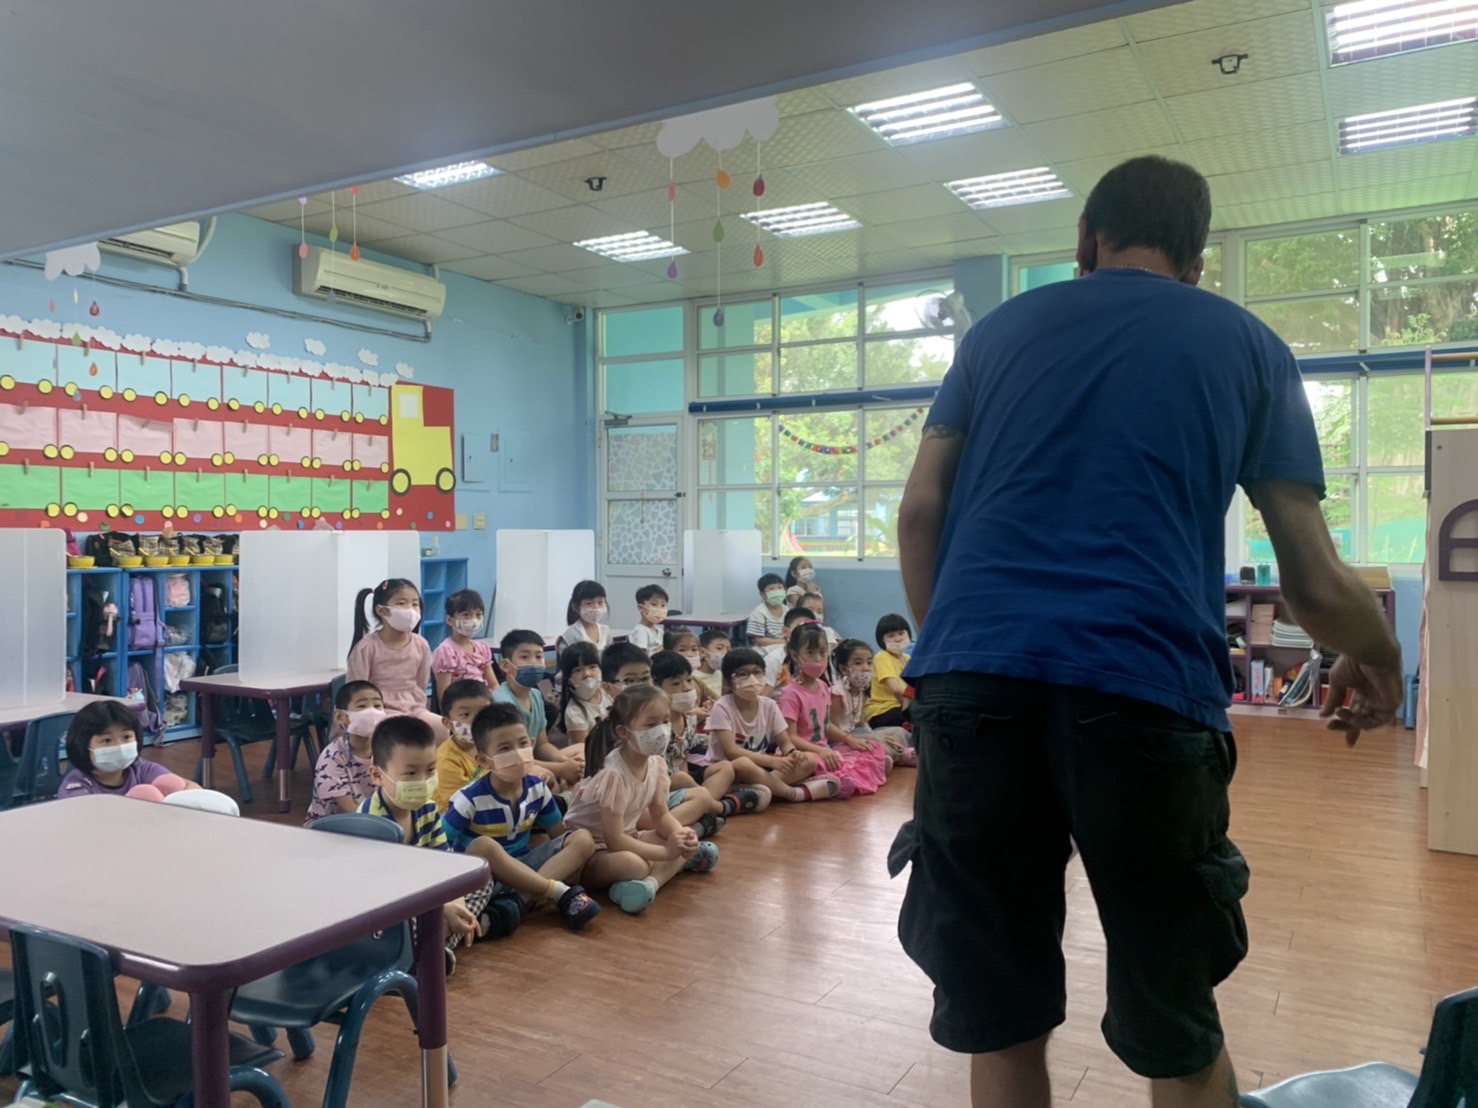 Teaching English and Living in Taiwan Jobs Available 教學工作, Frobel UK, SA, NZ, AU, USA and CA Accents WELCOME!  Up to 28 Hrs / Week!  Performance Bonuses! Great Environment! Help Finding Housing! First-Time Teacher Welcome! image